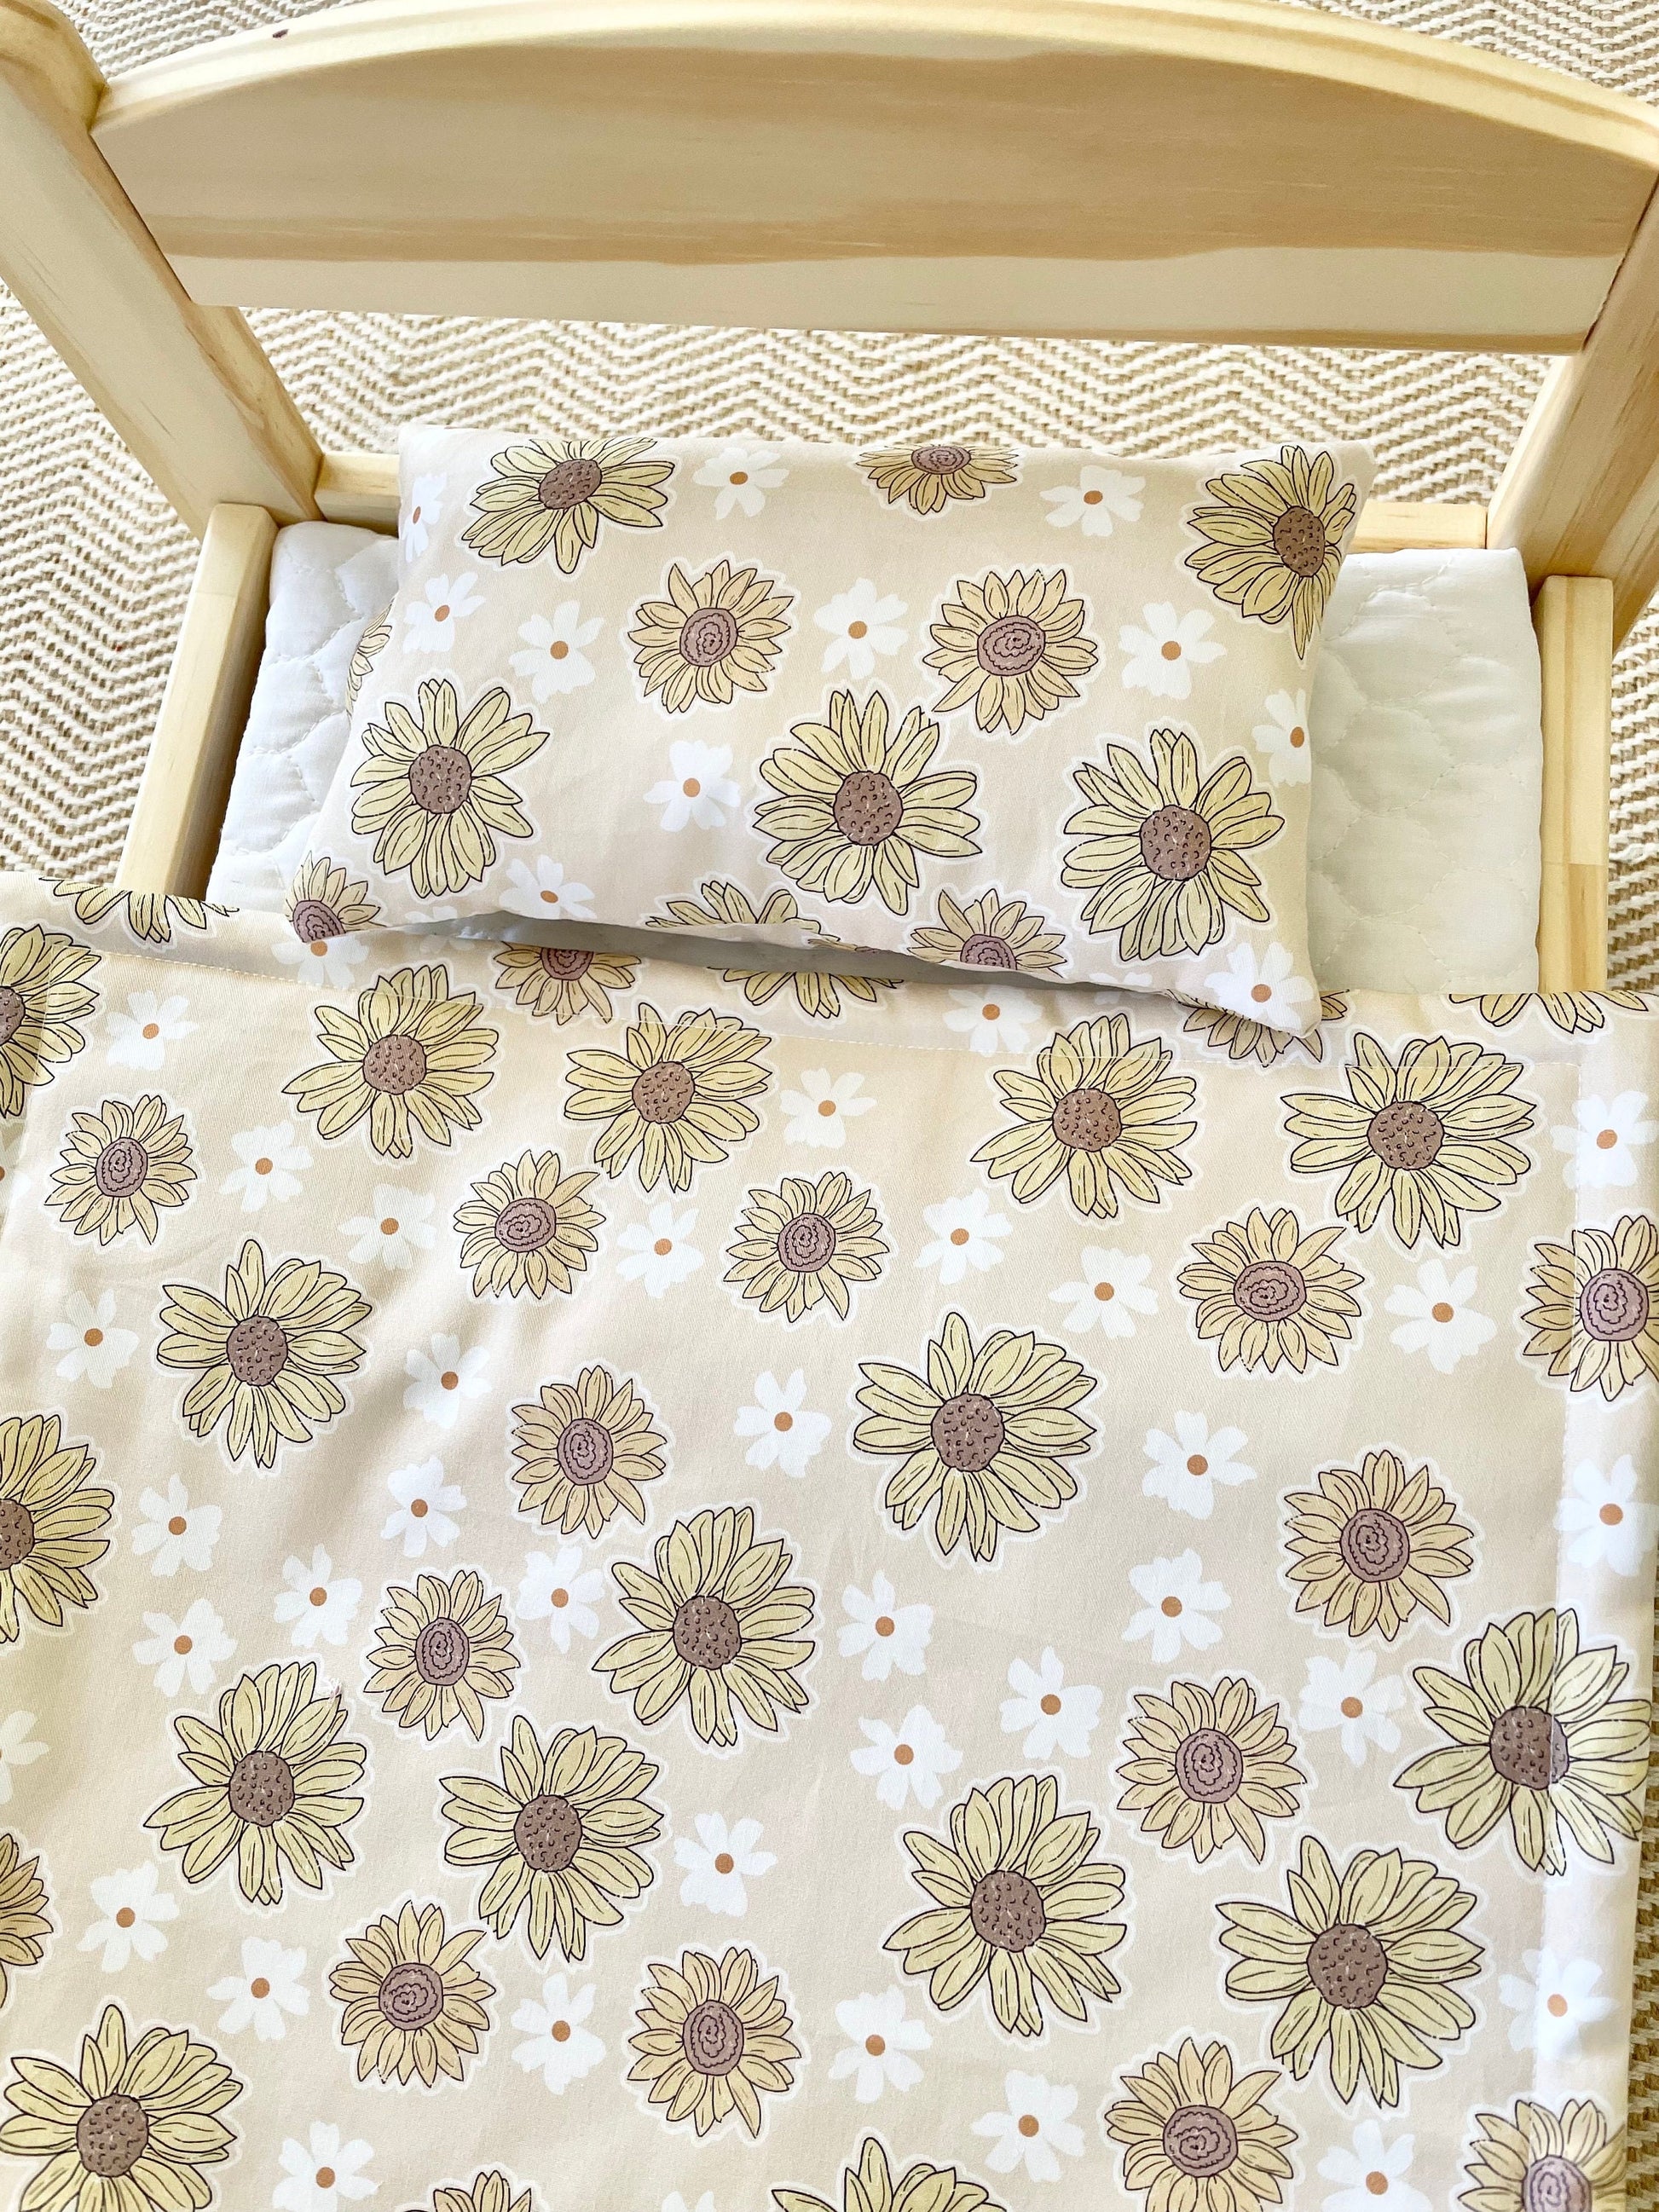 Sunflower Doll Bedding | Gift for niece | Crib sheet and pillow toy set | Doll Bed Cover Linen | Doll Cot Blanket | Crib Bedding Pram